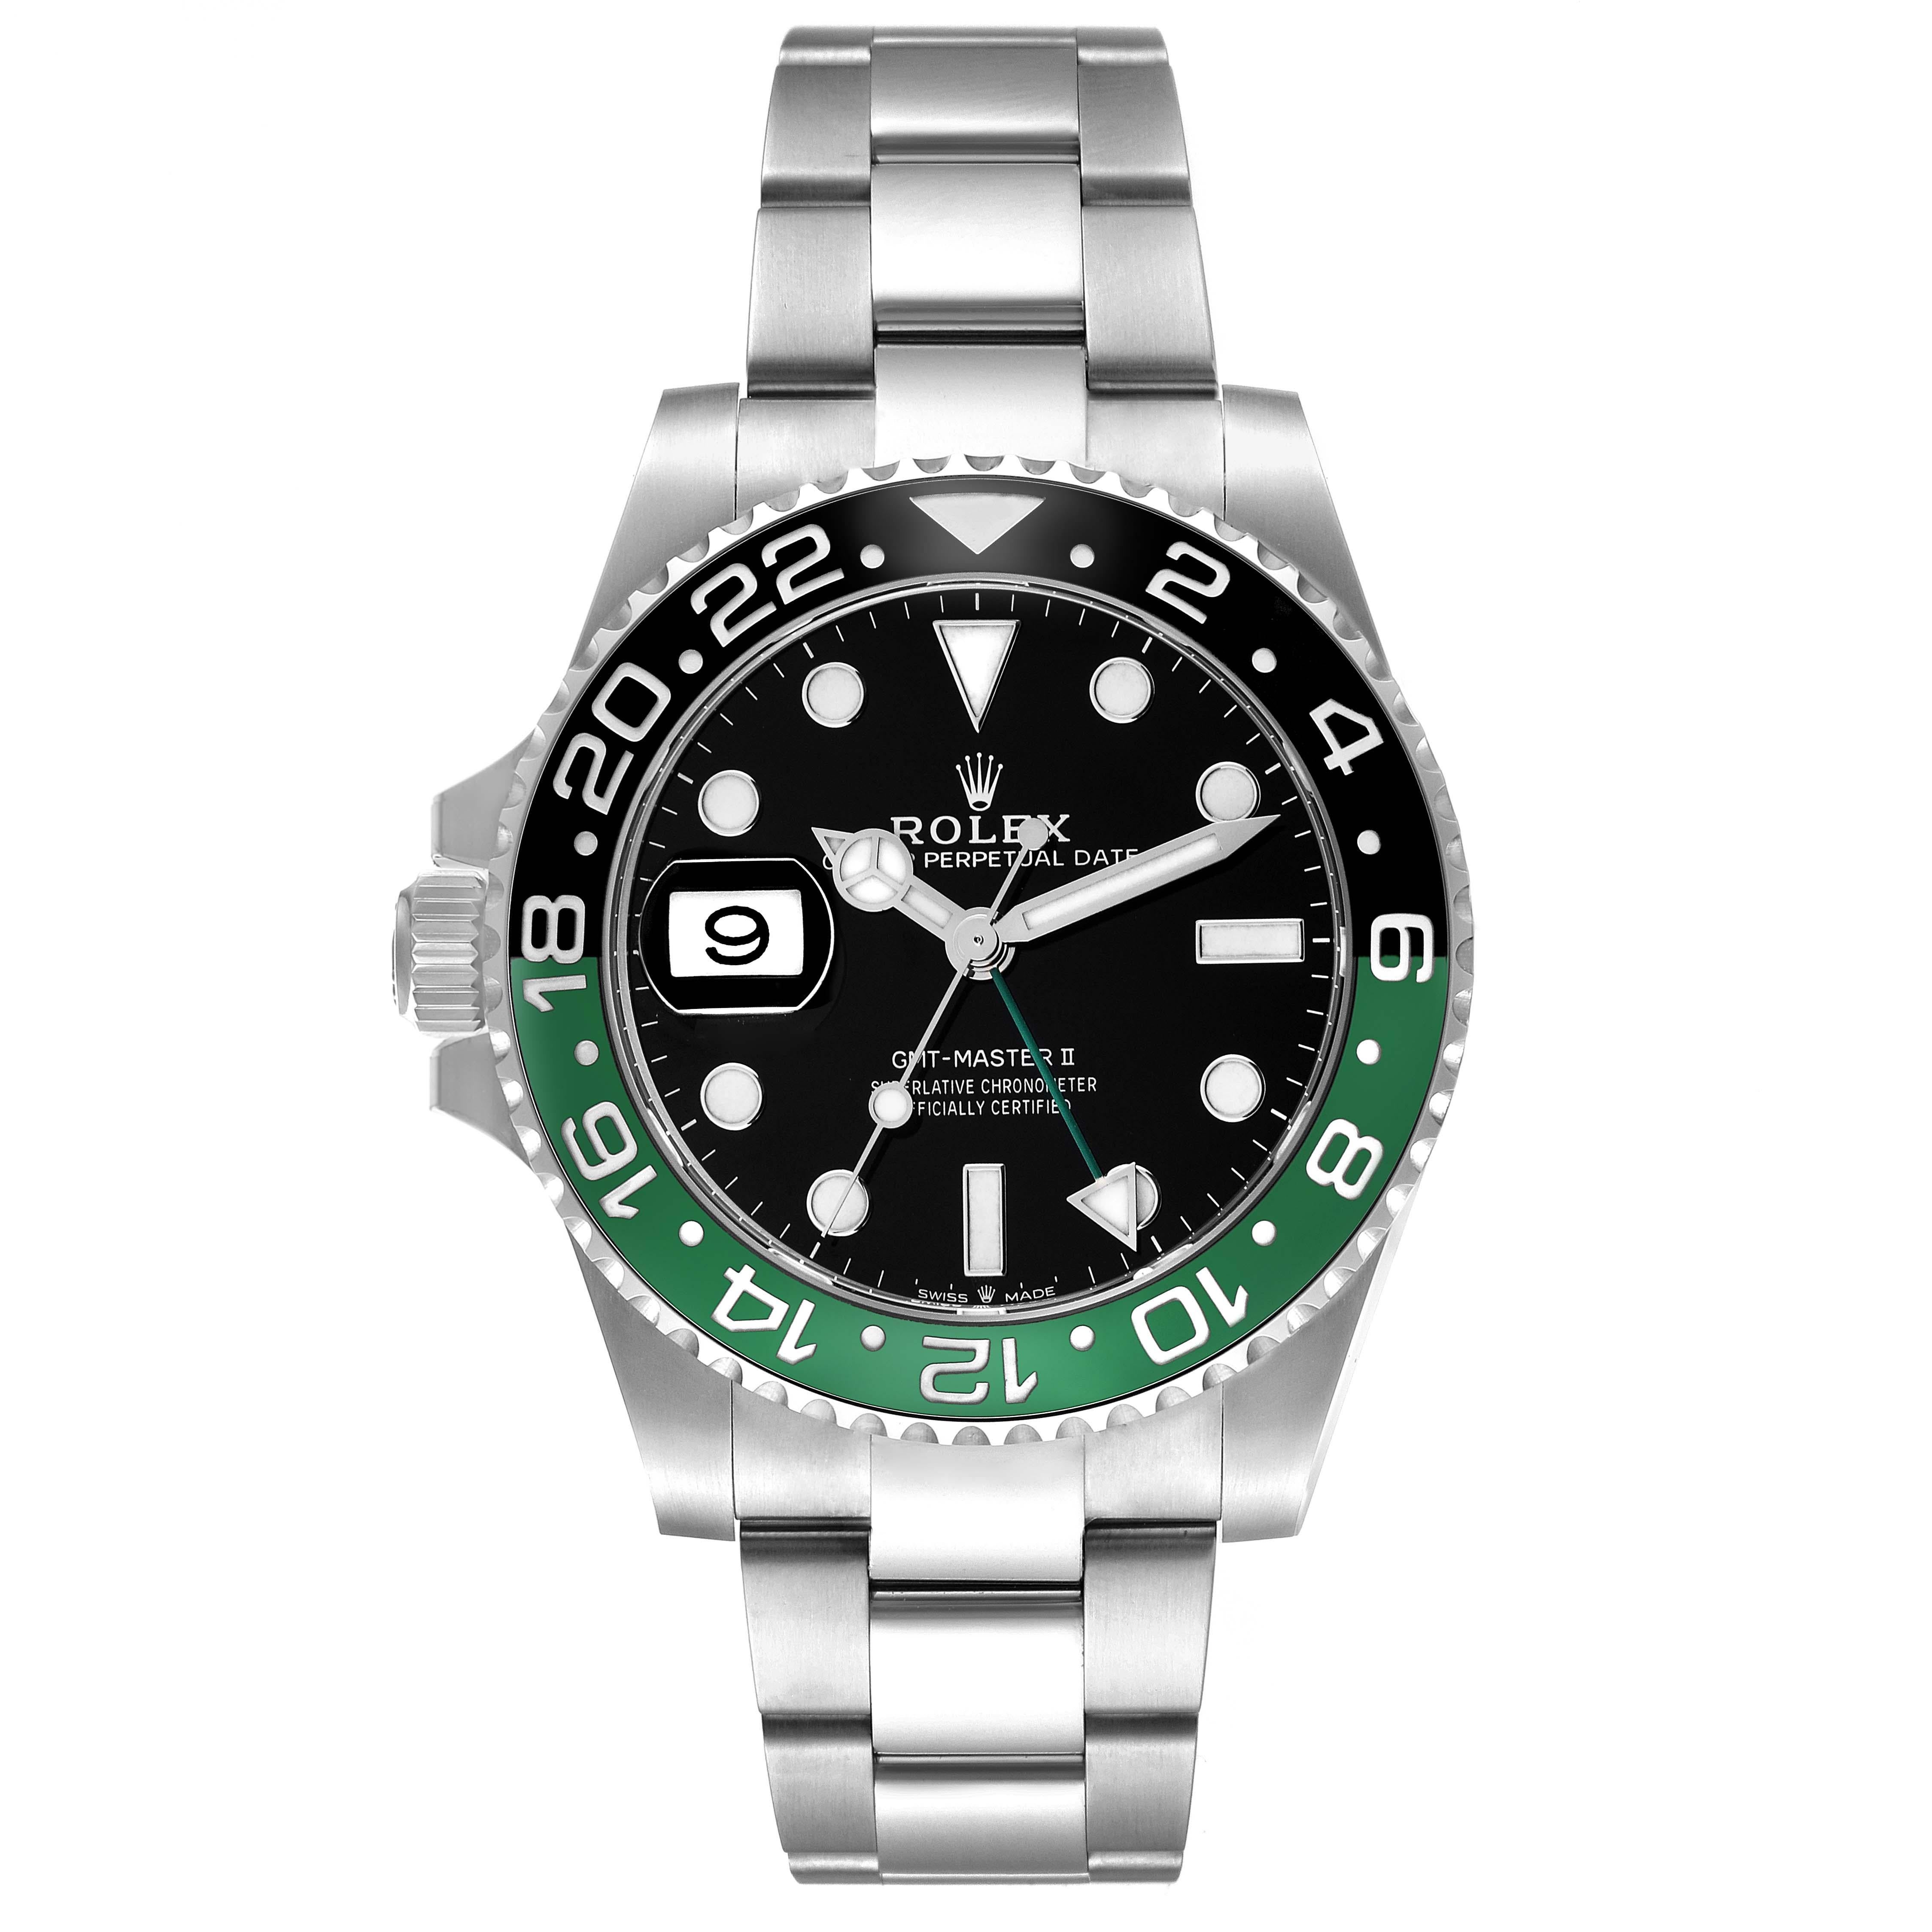 Rolex GMT Master II Sprite Bezel Oyster Steel Mens Watch 126720 Unworn. Officially certified chronometer automatic self-winding movement. Stainless steel case 40 mm in diameter. Rolex logo on a crown. Stainless steel bidirectional rotating 24-hour